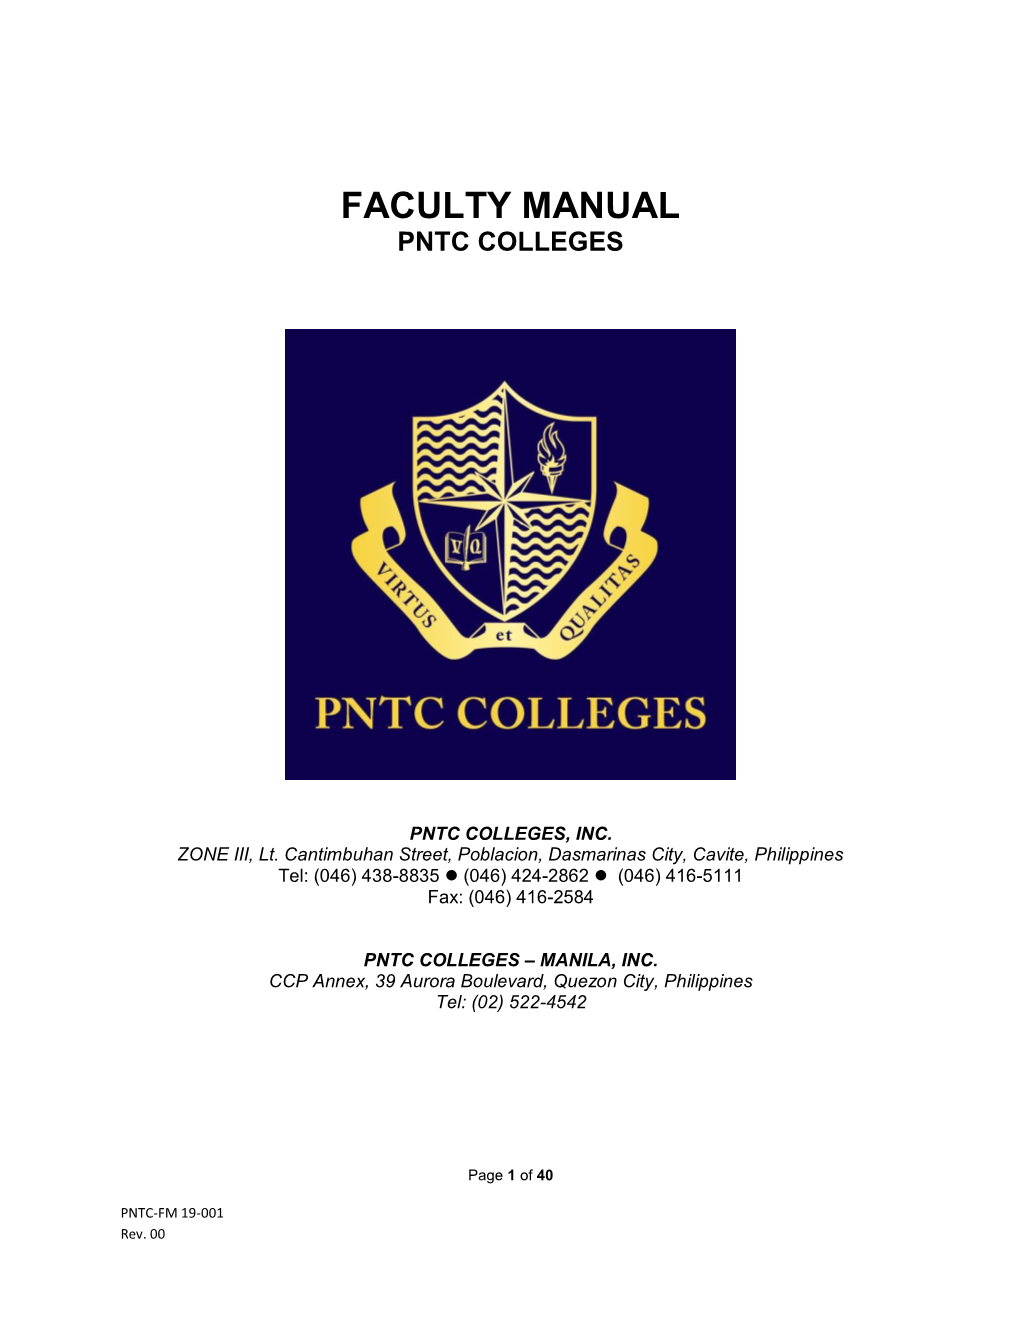 Faculty Manual Pntc Colleges